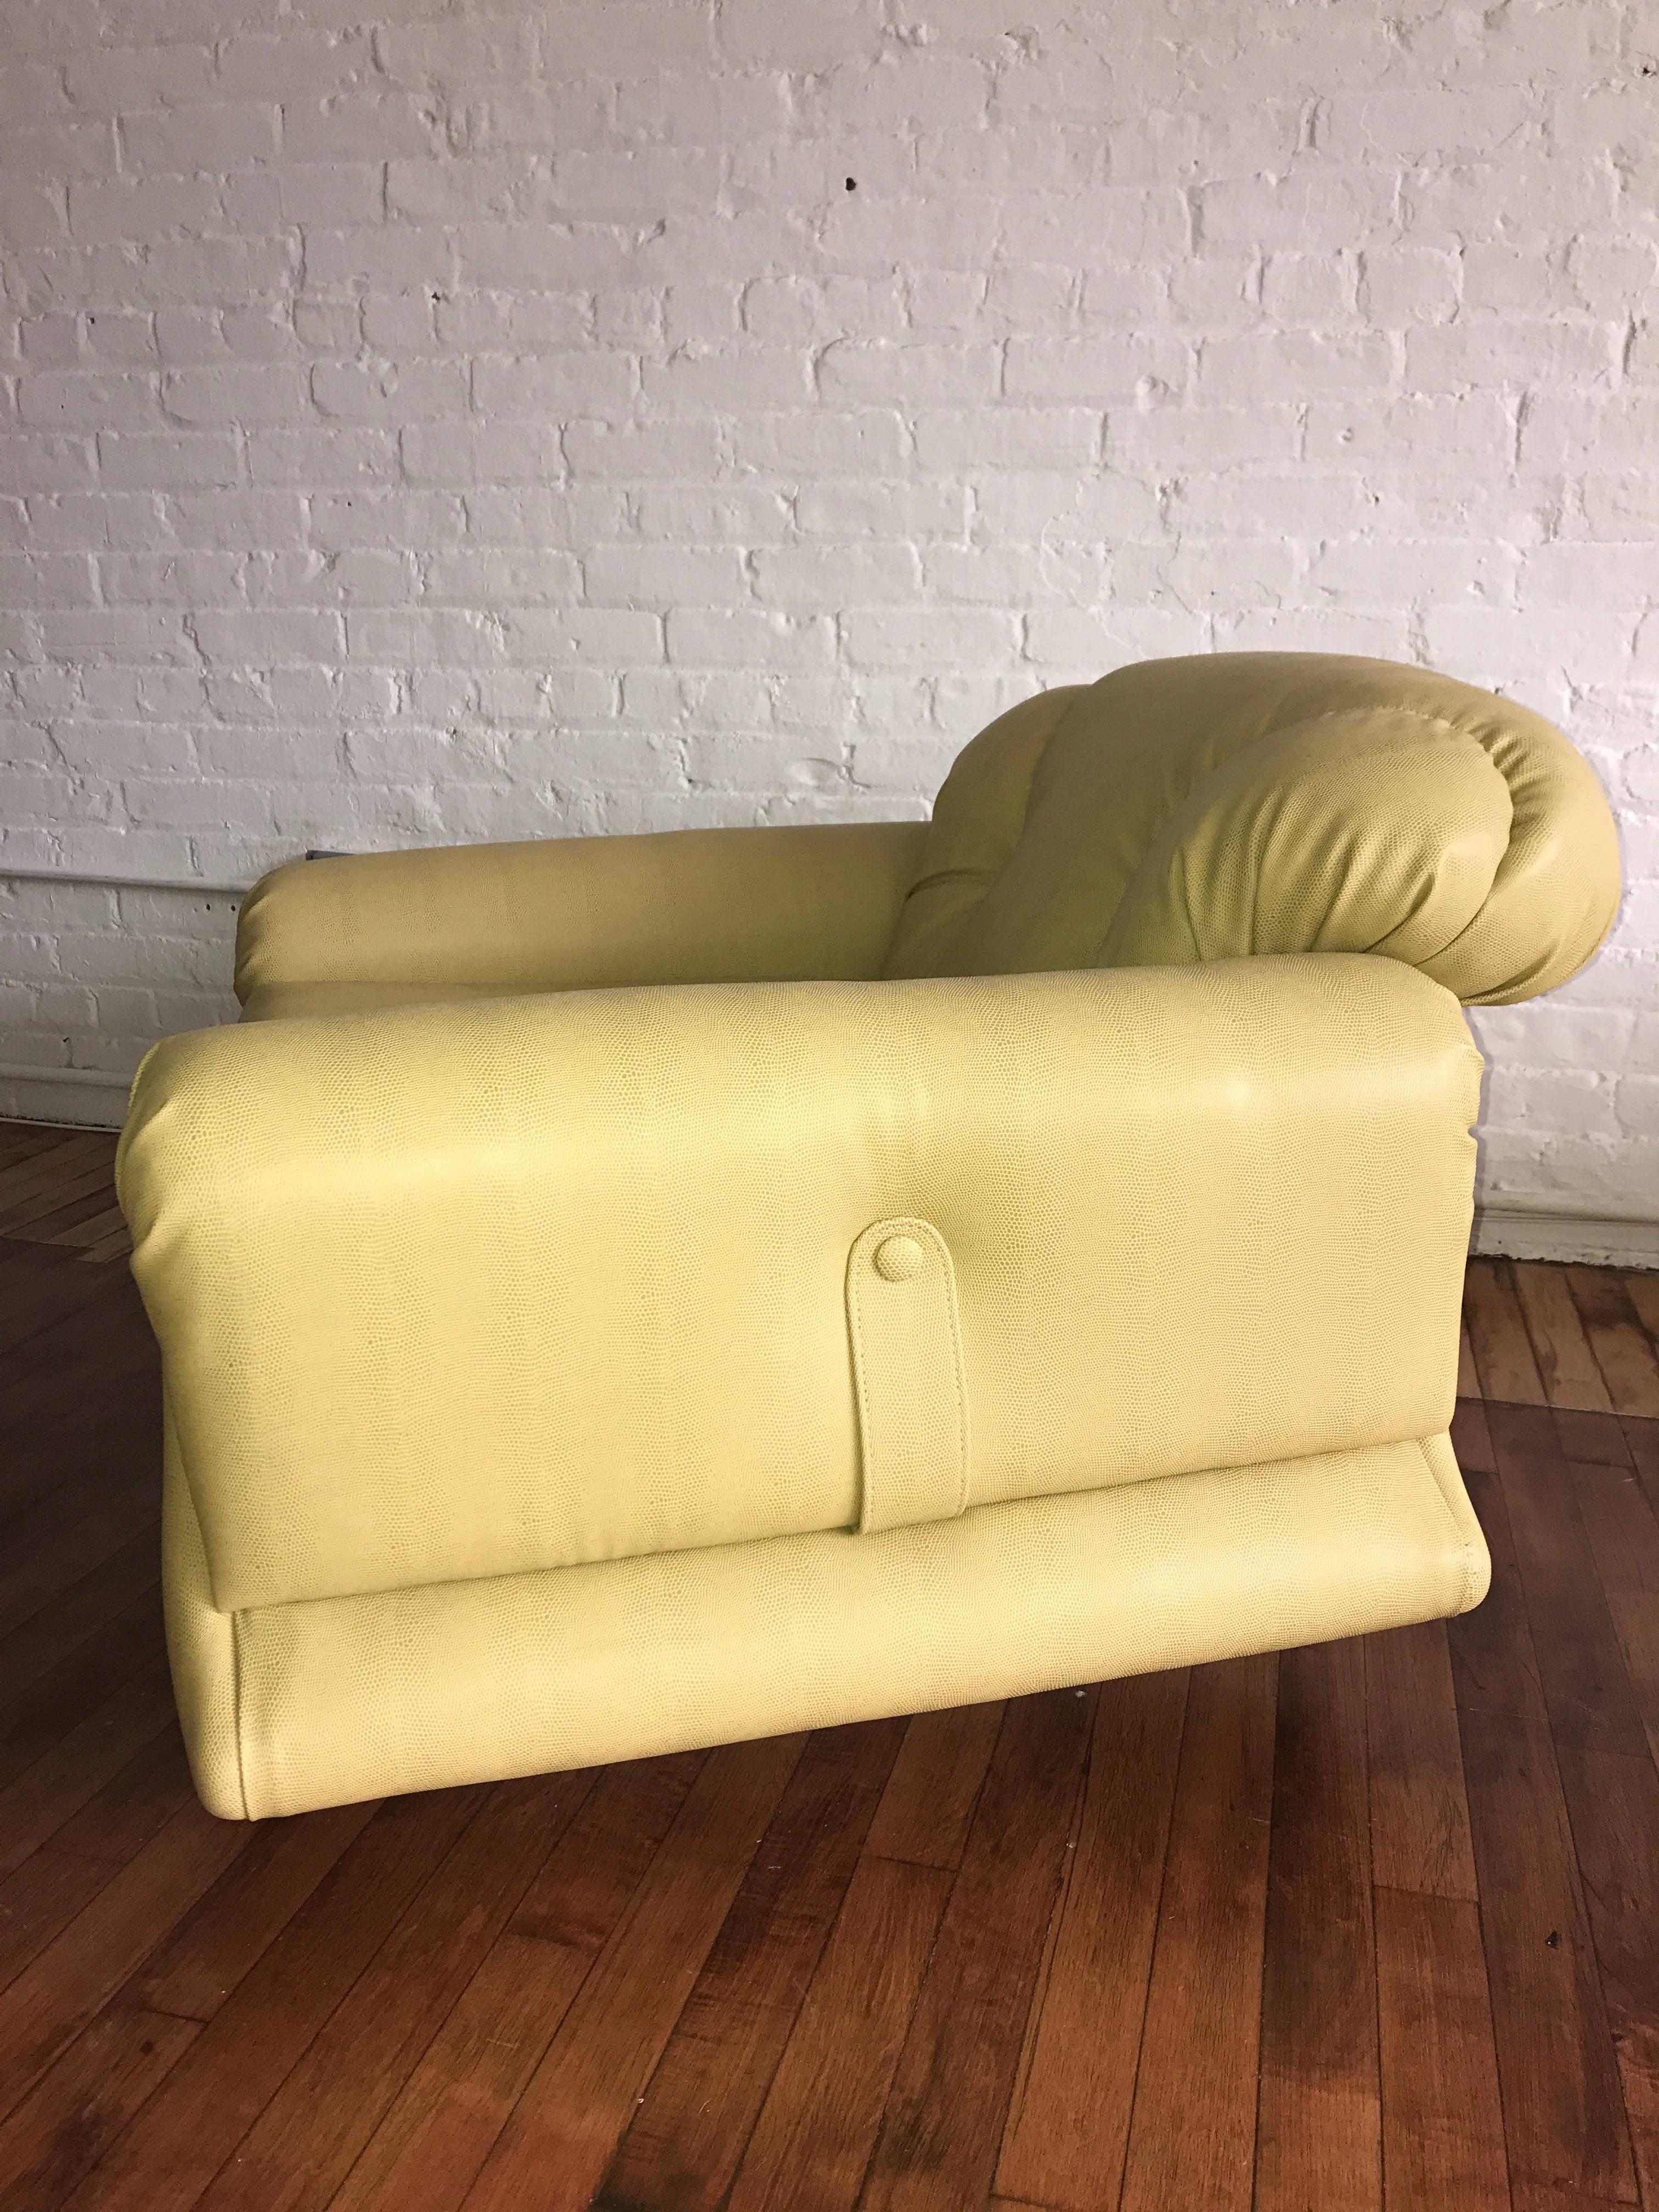 Mod Overstuffed Green Vinyl Lounge Chair In Good Condition For Sale In New York, NY